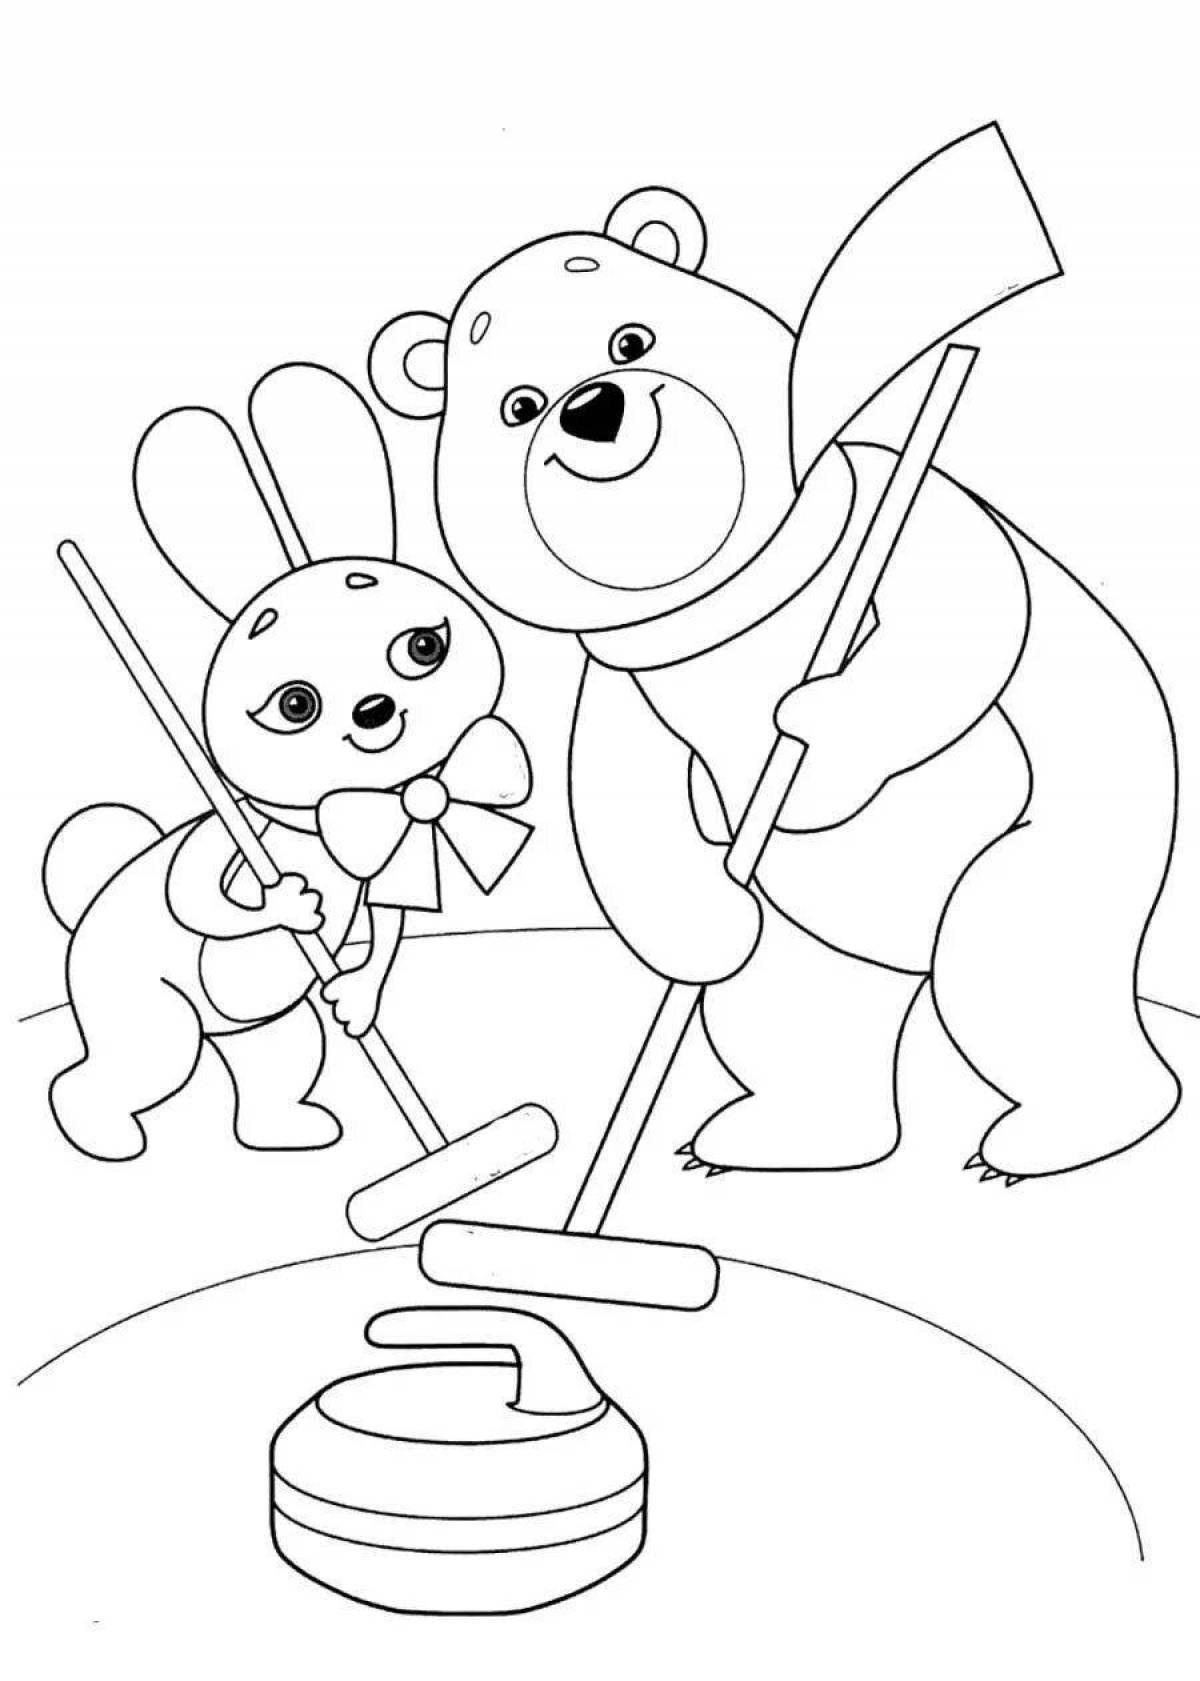 Fun coloring book for kids winter sports